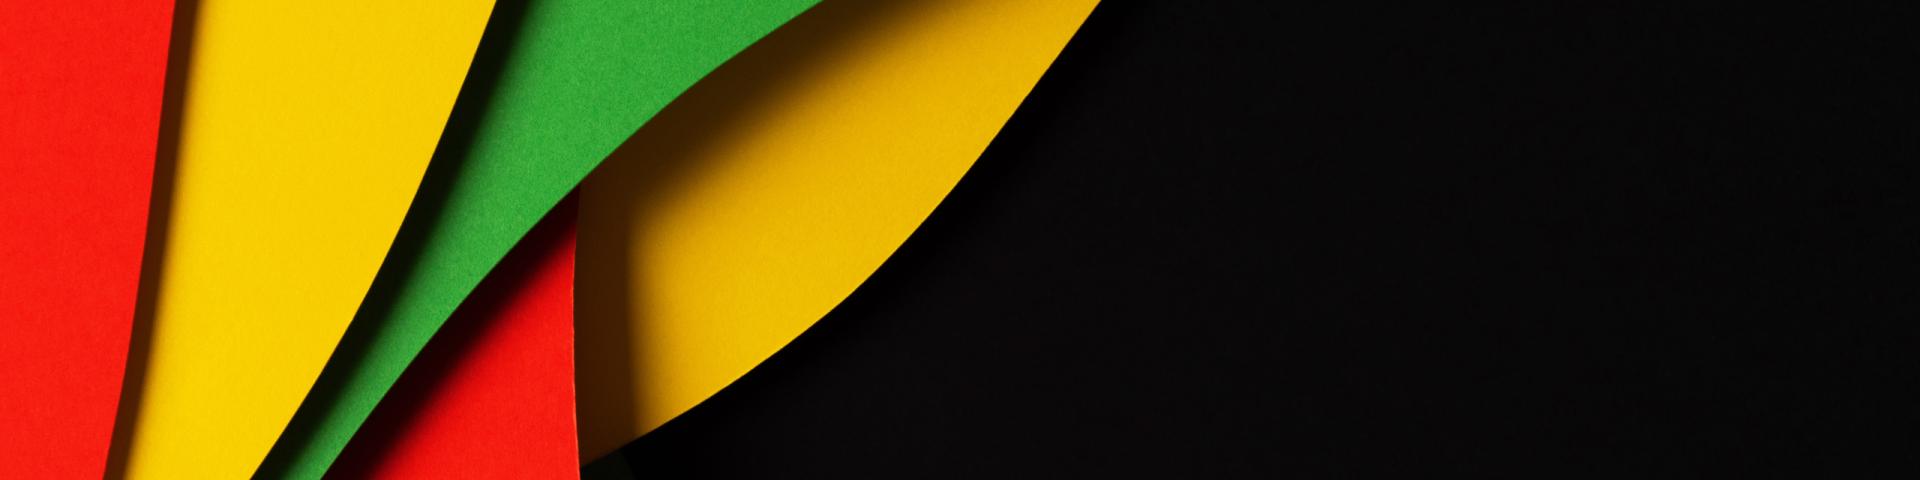 Black History Month Colours - Red, yellow, green, black